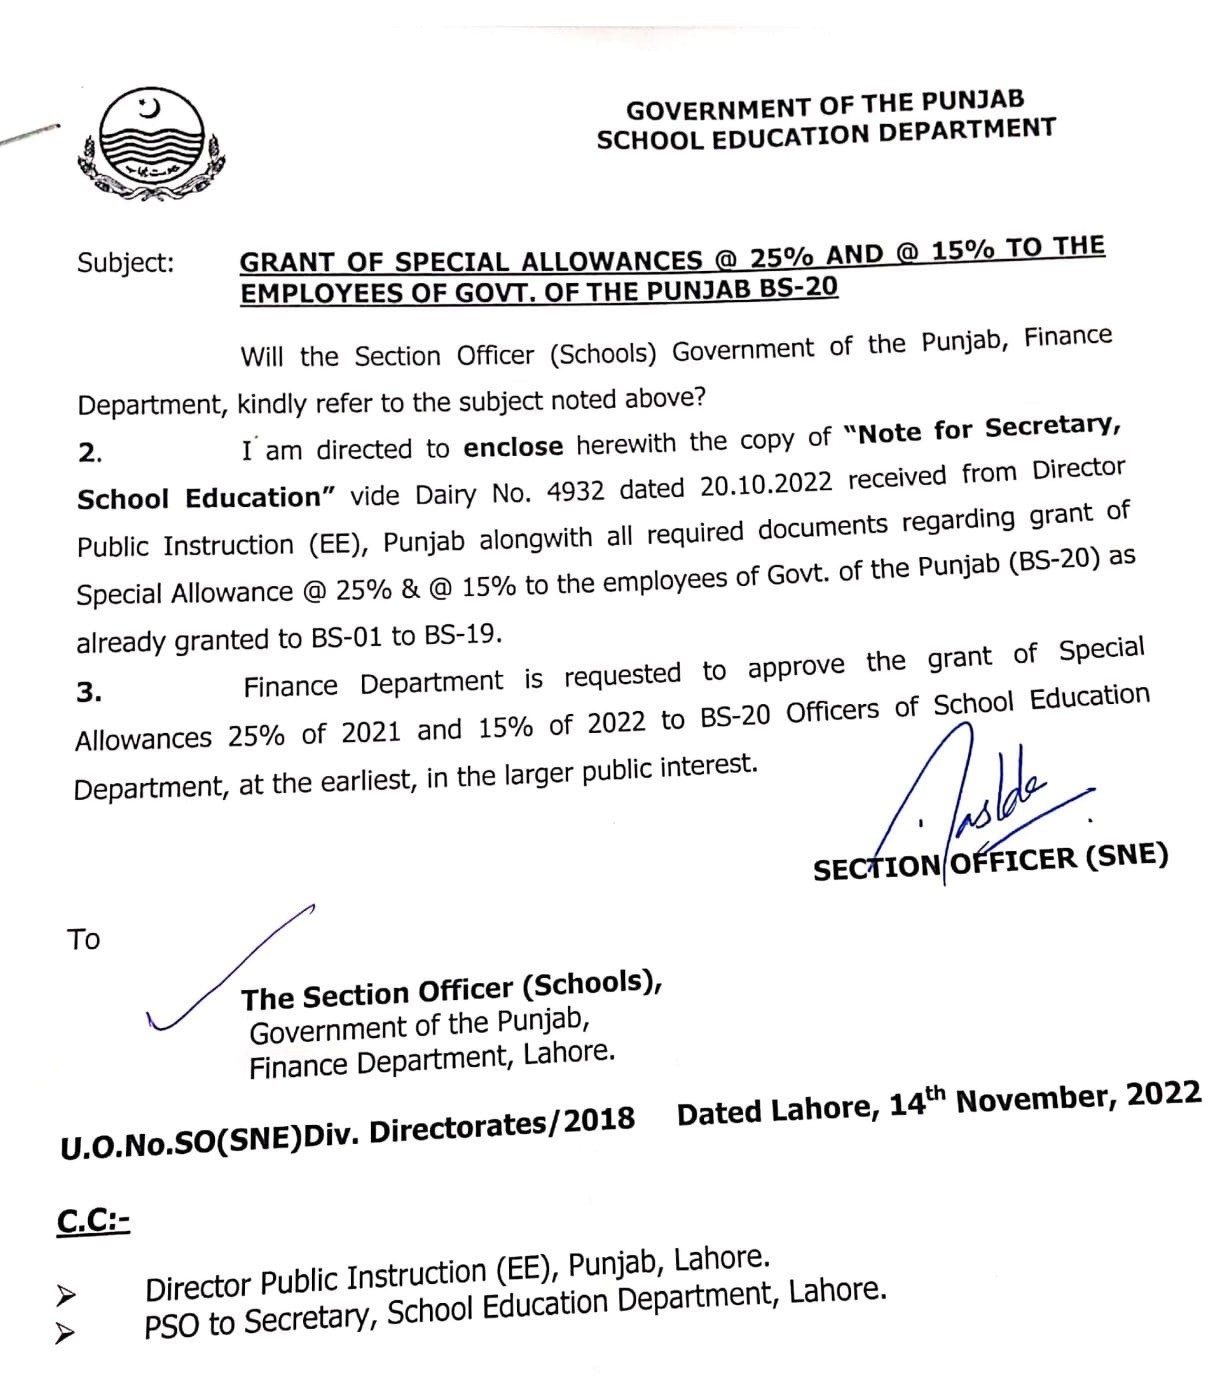 Grant of Special Allowance @ 25% and 15% to the Employees of Punjab BPS-20